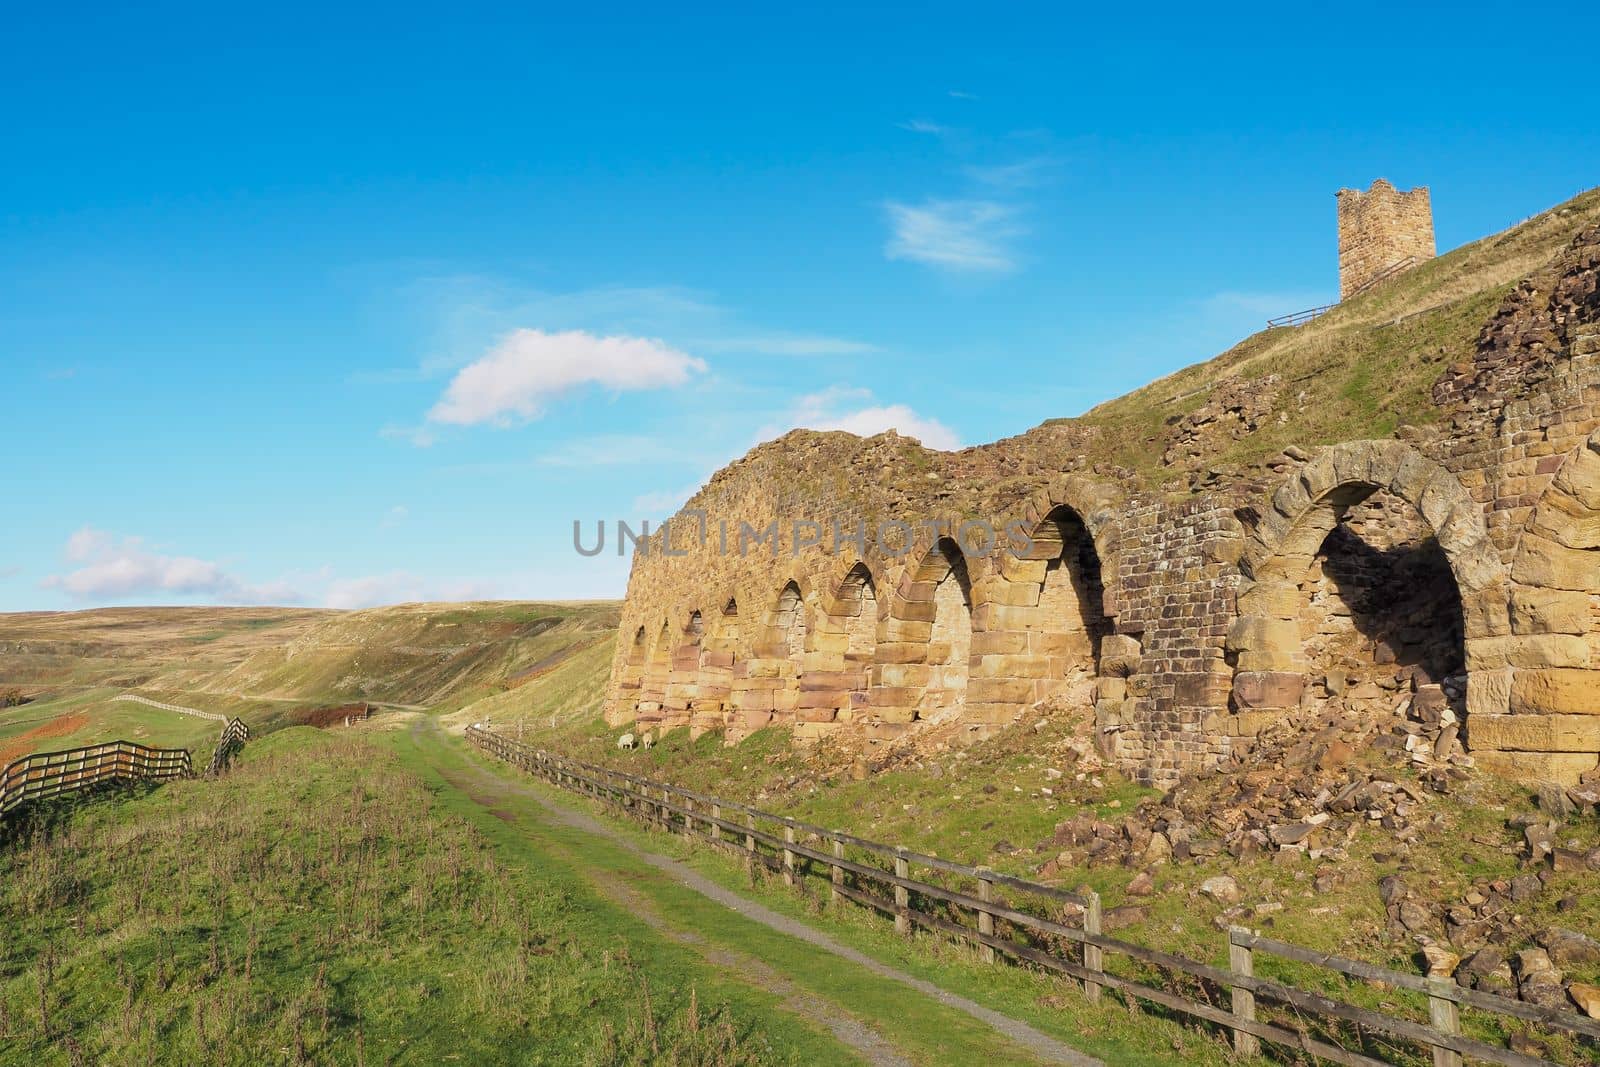 Ruins of ironstone kilns for roasting ore, East Rosedale Mines, North York Moors by PhilHarland